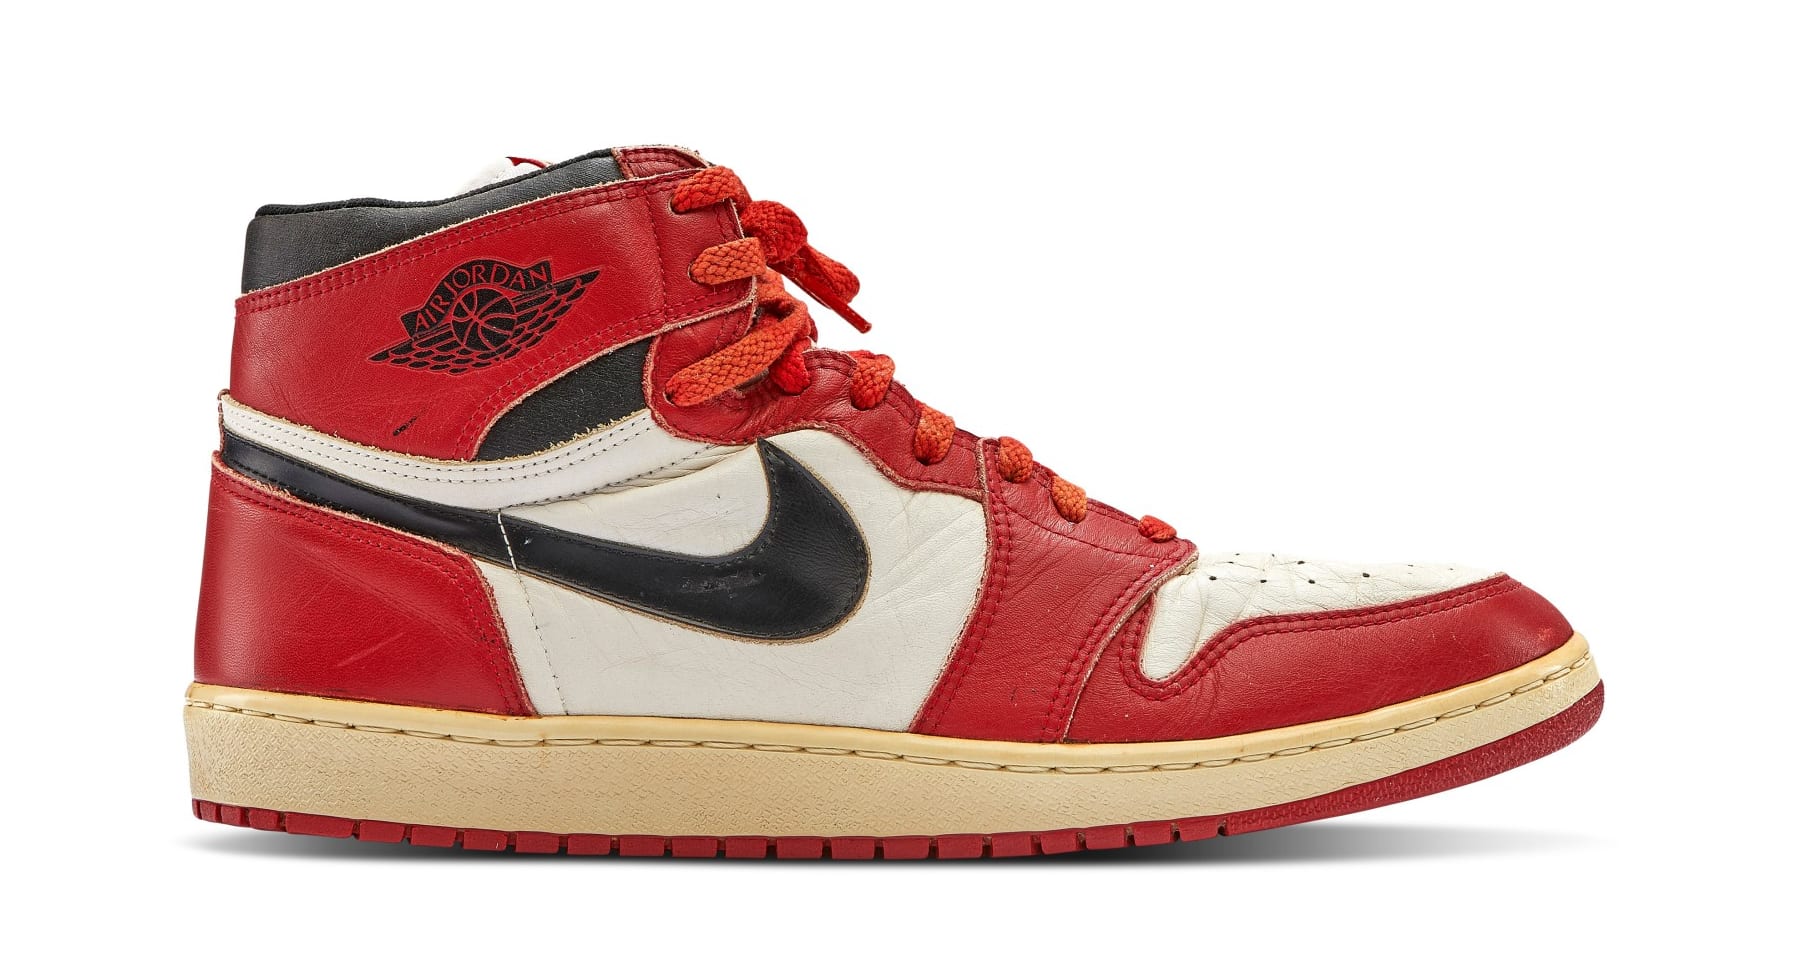 how much did jordan 1 cost in 1985